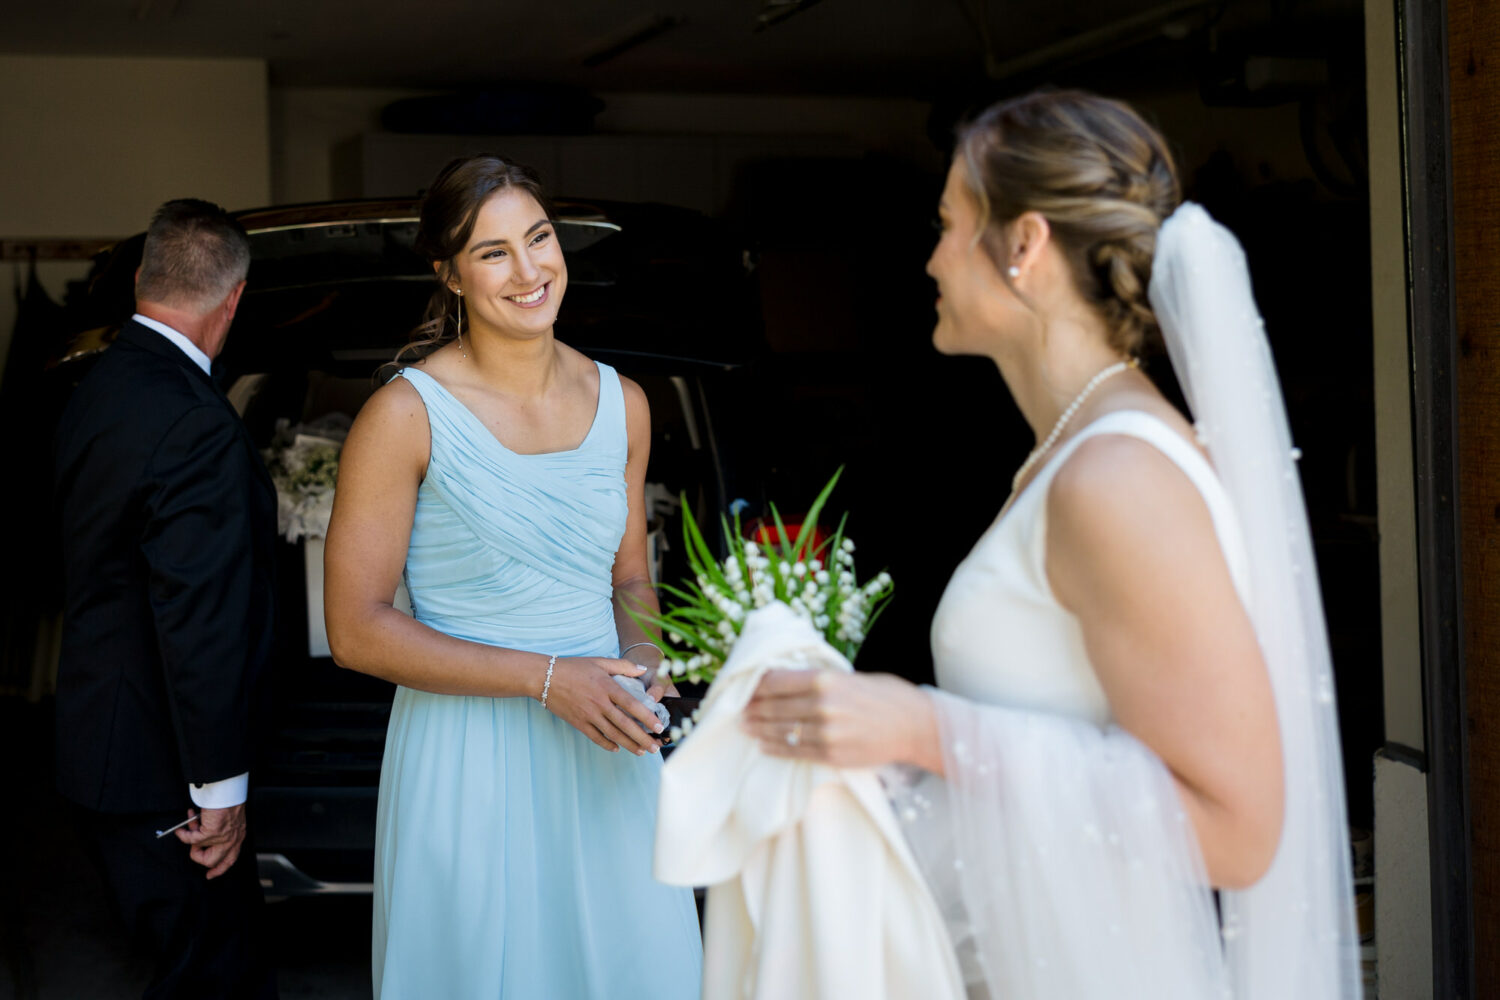 The sister of the bride is ready for the big day, wearing a sleeveless baby blue bridesmaid dress.